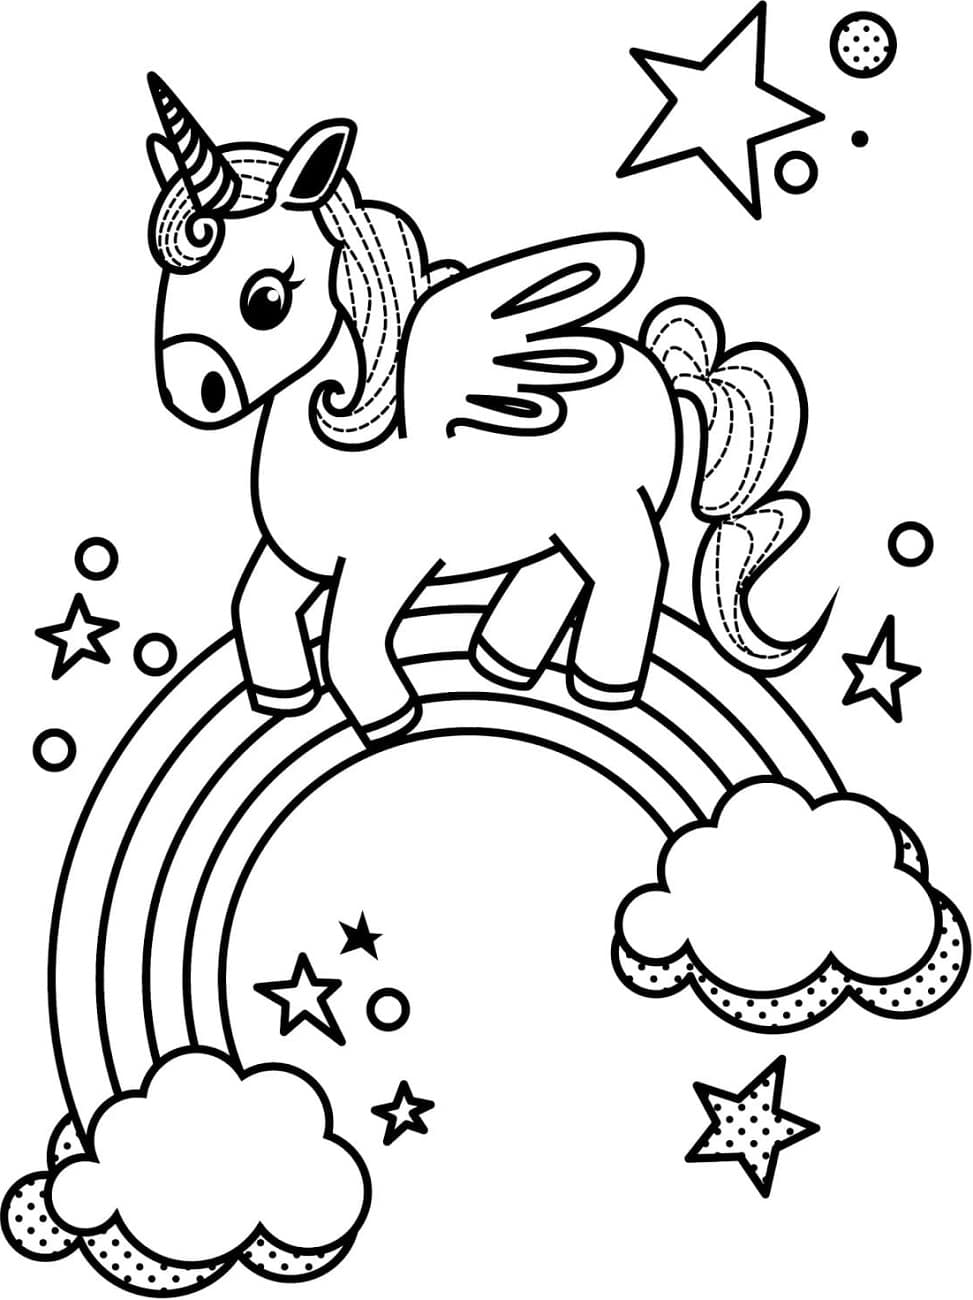 Little Unicorn And Rainbow Coloring Page - Free Printable ...